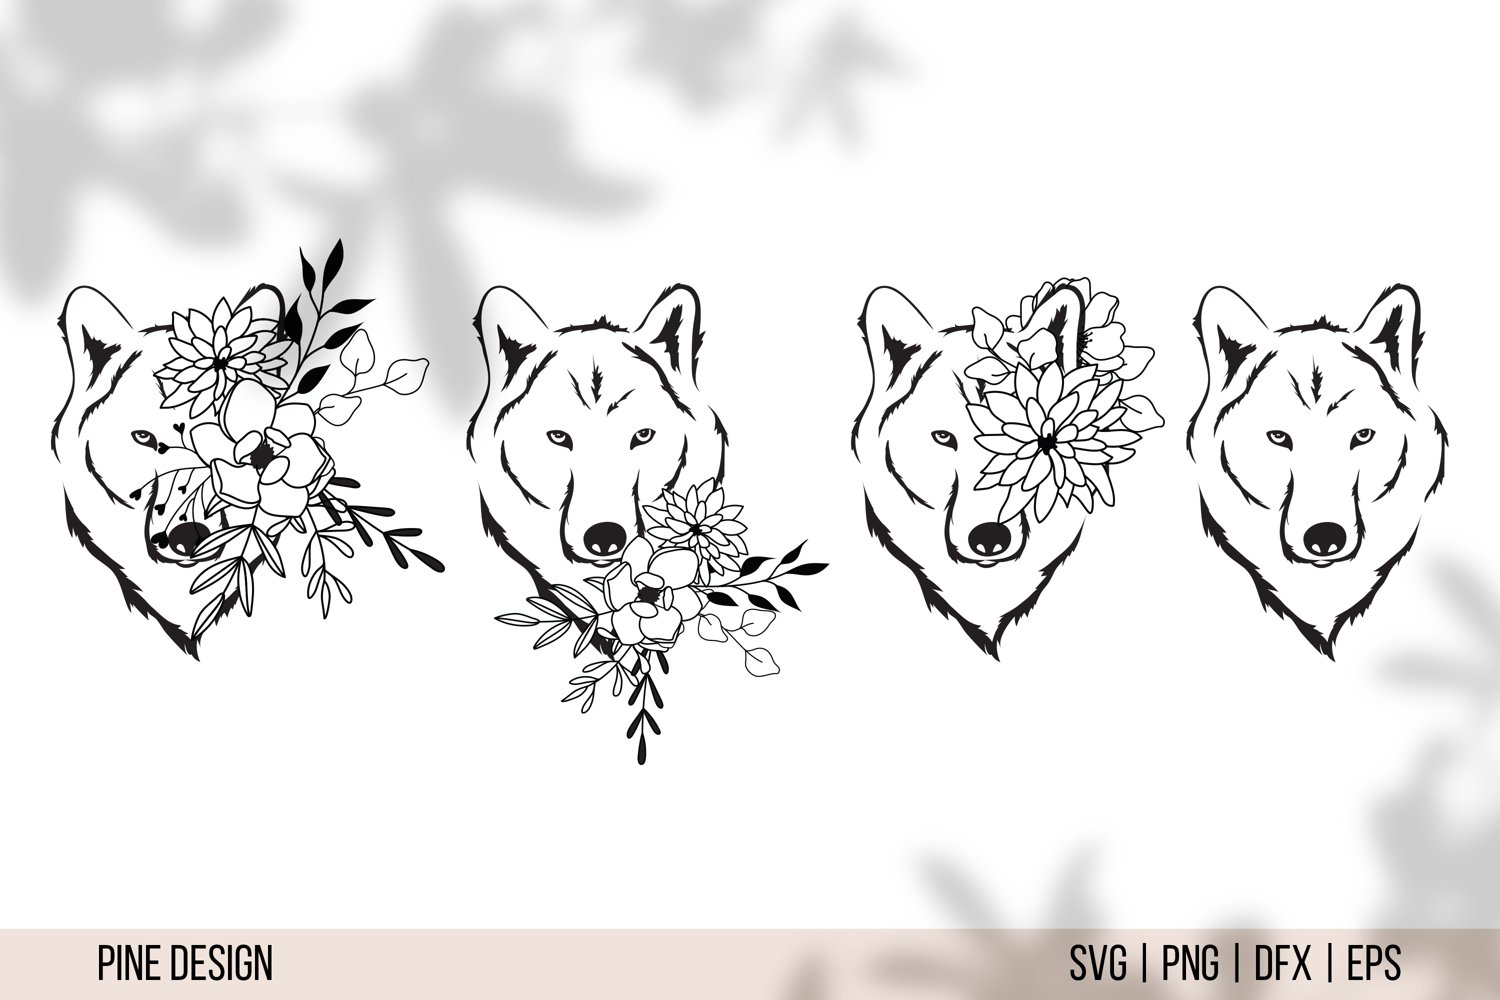 Three wolfs with flowers on their heads.